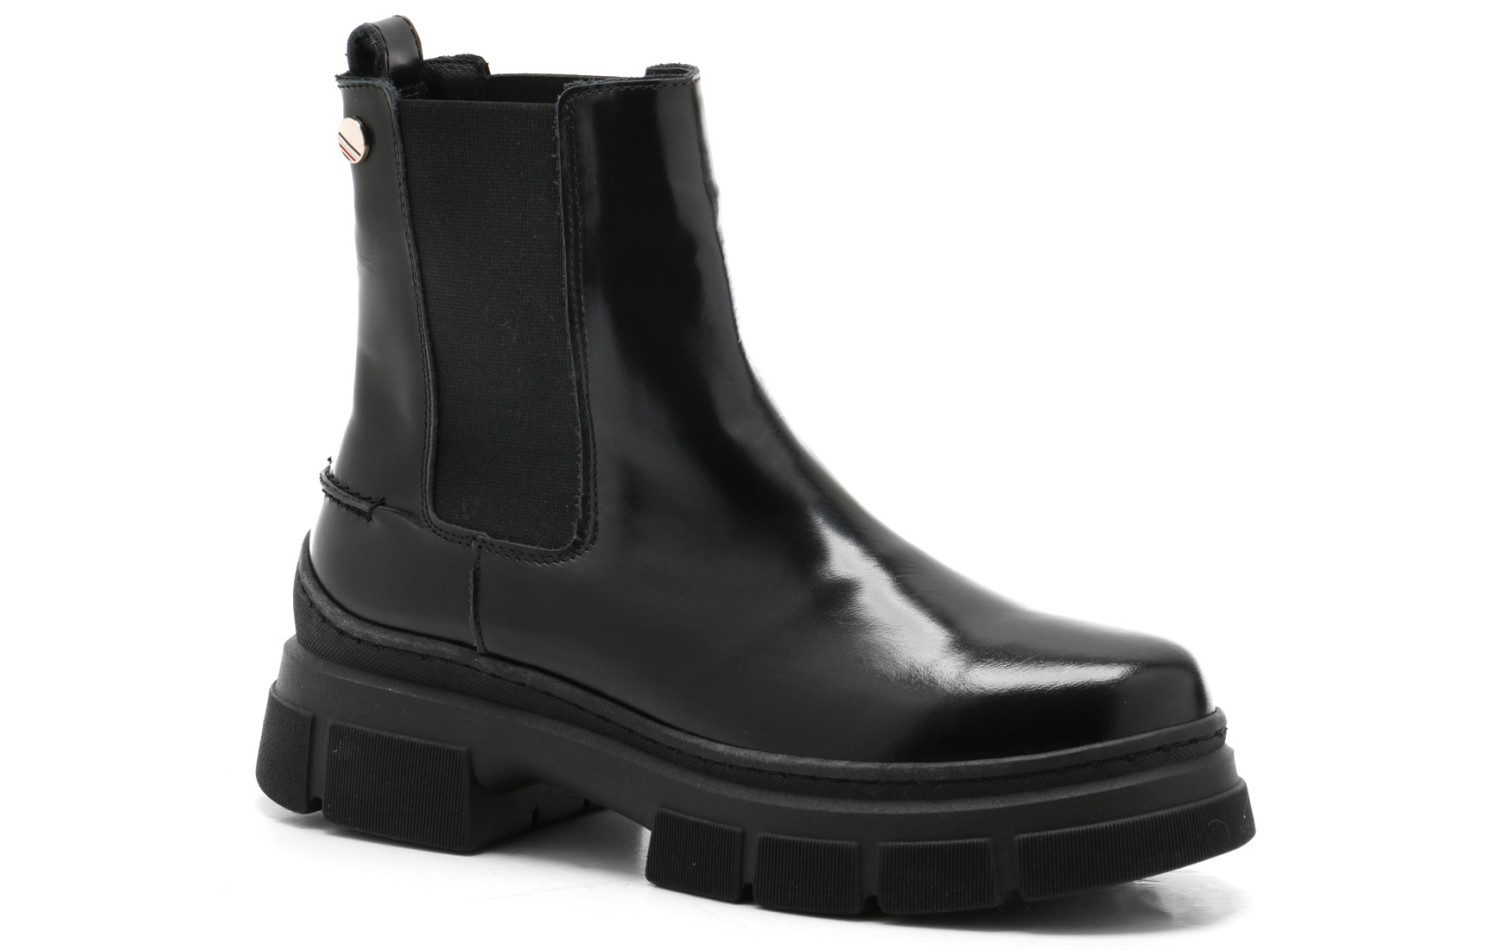 Sztyblety TOMMY HILFIGER PREPPY OUTDOOR LOW BOOT FW0FW06649